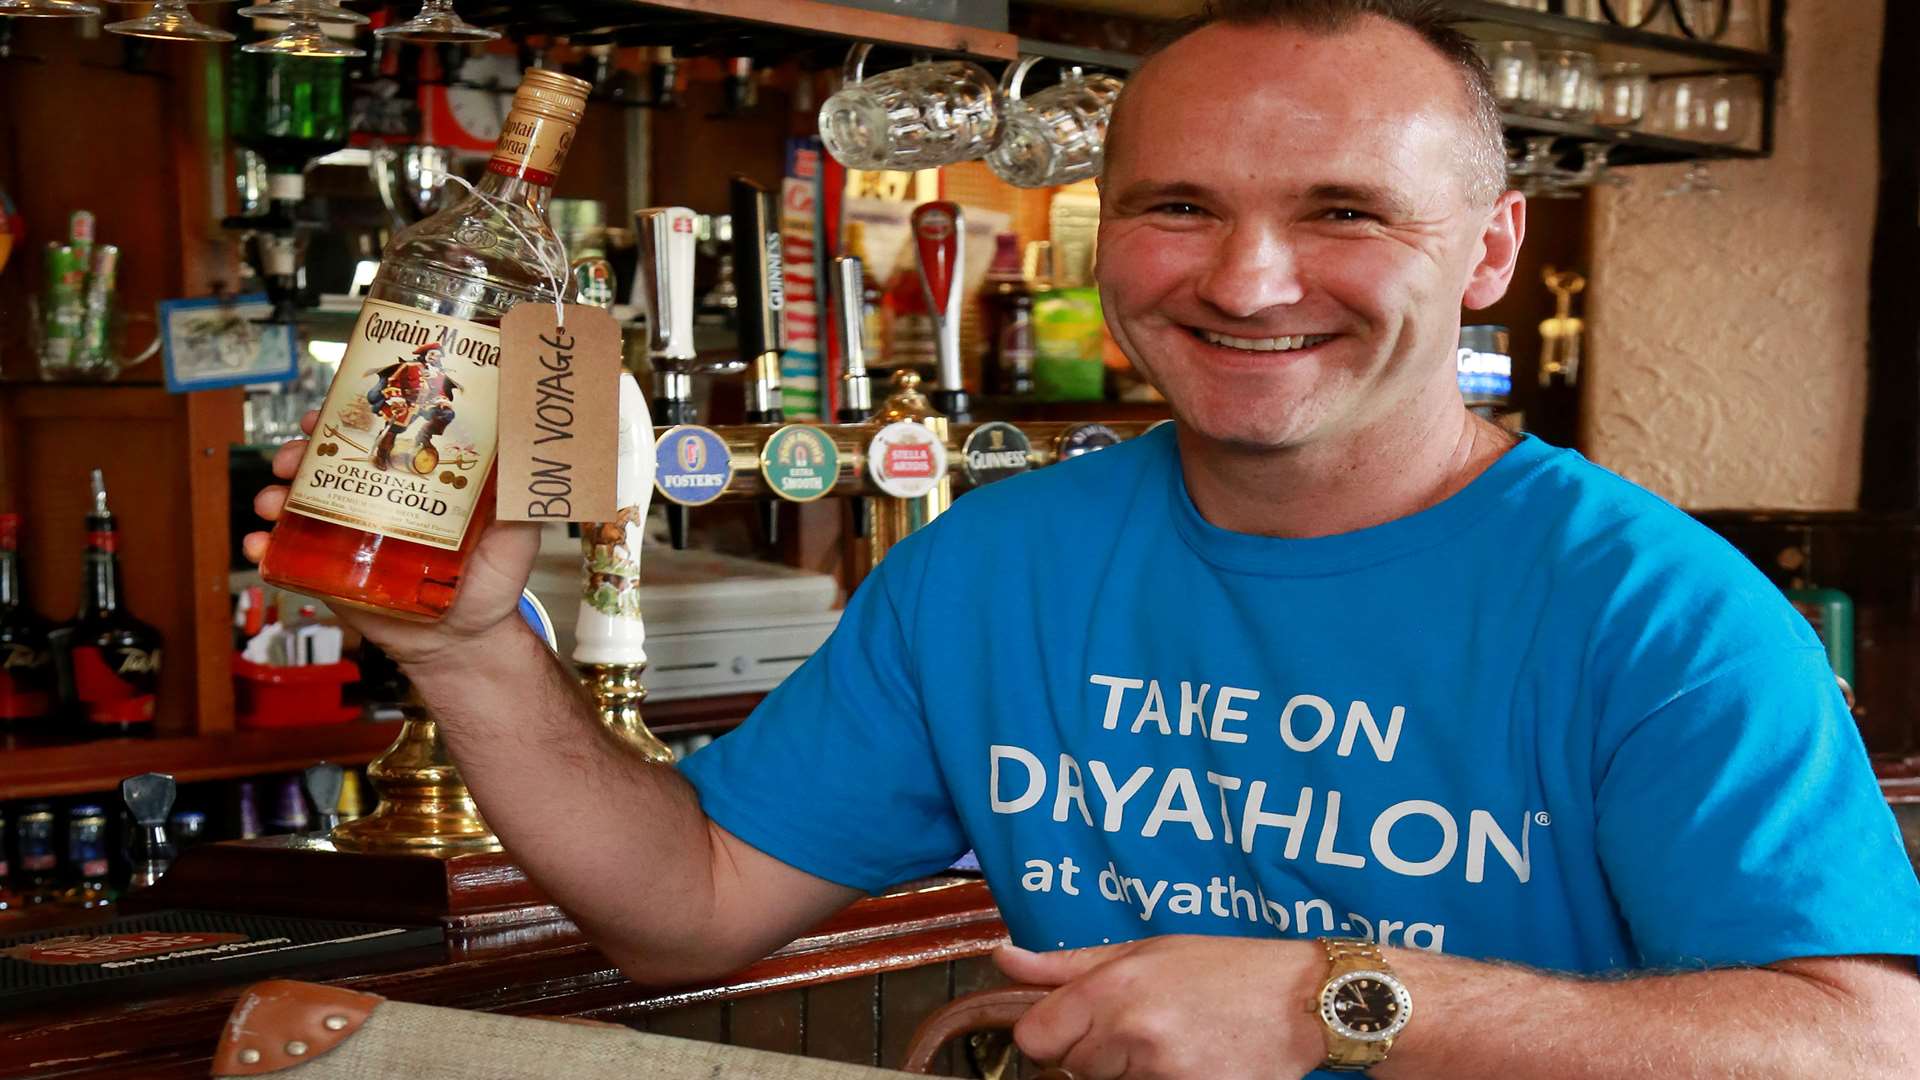 Mark Powell, 42, has taken on the challenge of a year long Dryathlon in a bid to support Cancer Research UK and to improve his health and fitness levels